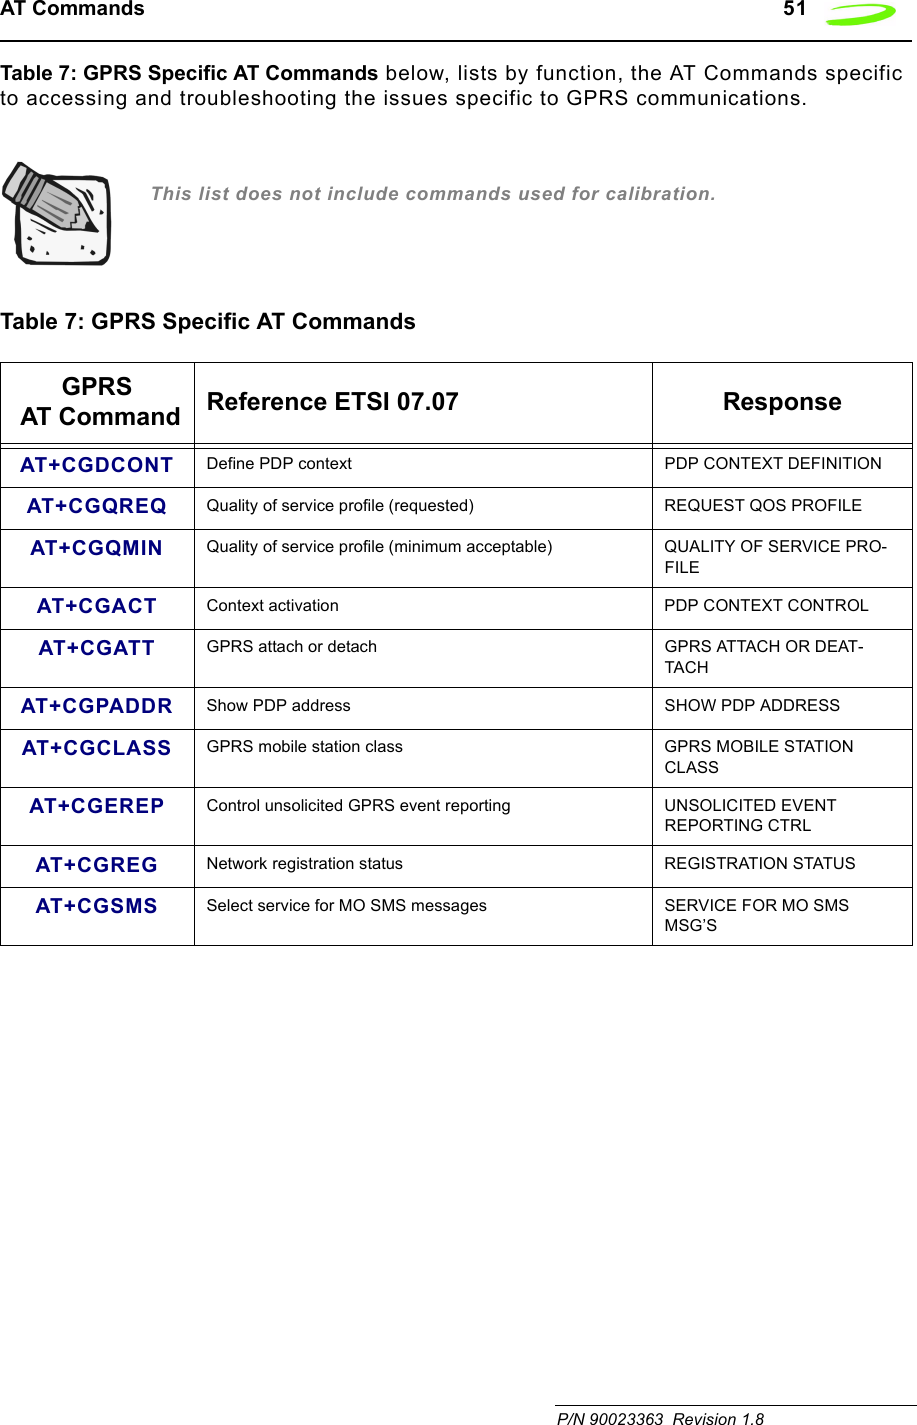 AT Commands   51 P/N 90023363  Revision 1.8 Table 7: GPRS Specific AT Commands below, lists by function, the AT Commands specific to accessing and troubleshooting the issues specific to GPRS communications.This list does not include commands used for calibration.Table 7: GPRS Specific AT CommandsGPRS AT Command Reference ETSI 07.07 ResponseAT+CGDCONT Define PDP context PDP CONTEXT DEFINITIONAT+CGQREQ Quality of service profile (requested) REQUEST QOS PROFILEAT+CGQMIN Quality of service profile (minimum acceptable) QUALITY OF SERVICE PRO-FILEAT+CGACT Context activation PDP CONTEXT CONTROLAT+CGATT GPRS attach or detach GPRS ATTACH OR DEAT-TACHAT+CGPADDR Show PDP address SHOW PDP ADDRESSAT+CGCLASS GPRS mobile station class GPRS MOBILE STATION CLASSAT+CGEREP Control unsolicited GPRS event reporting UNSOLICITED EVENT REPORTING CTRLAT+CGREG Network registration status REGISTRATION STATUSAT+CGSMS Select service for MO SMS messages SERVICE FOR MO SMS MSG’S